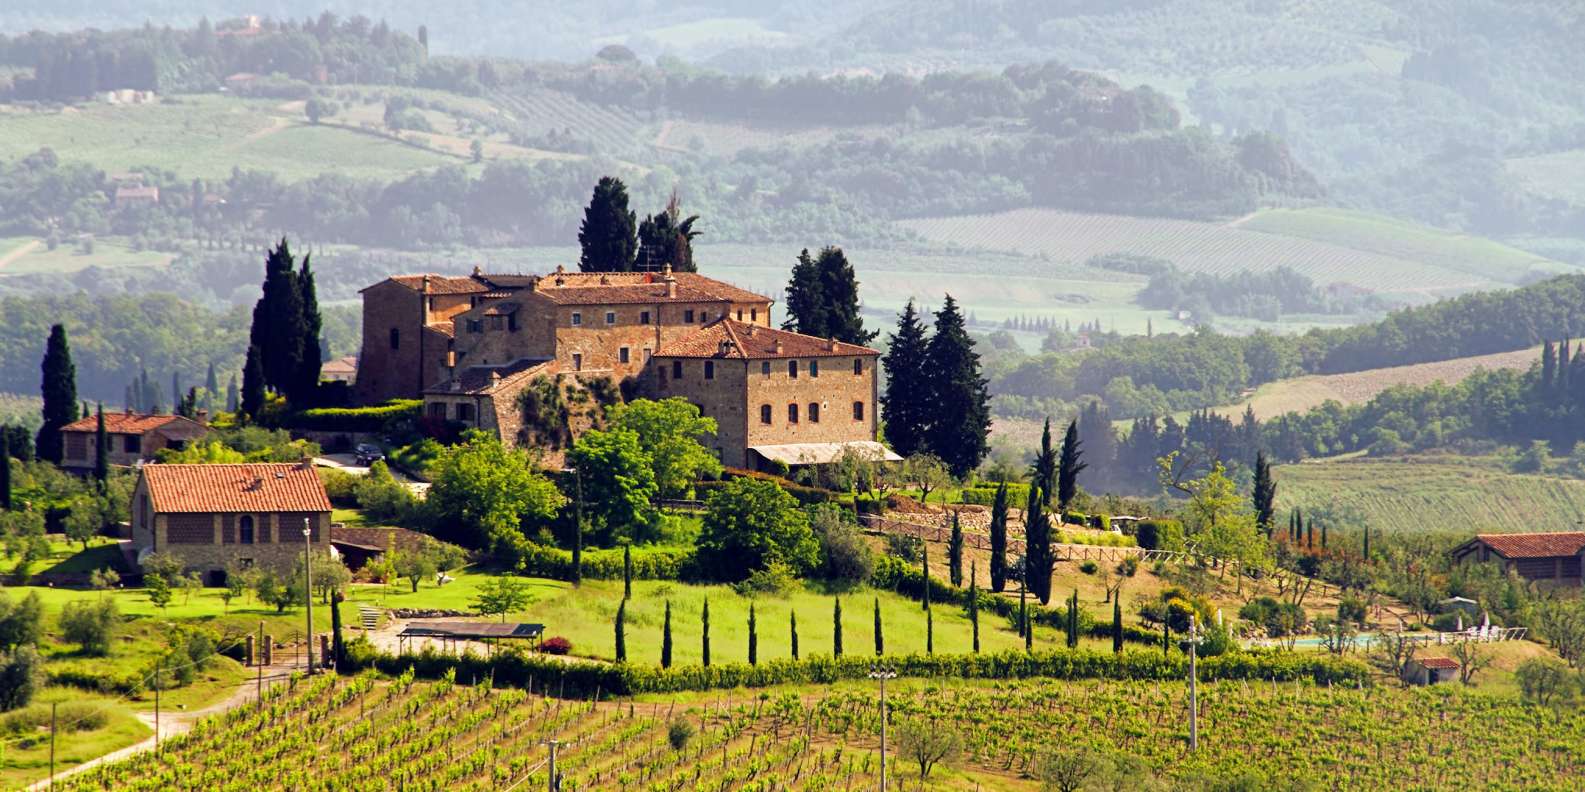 What to do in Pienza